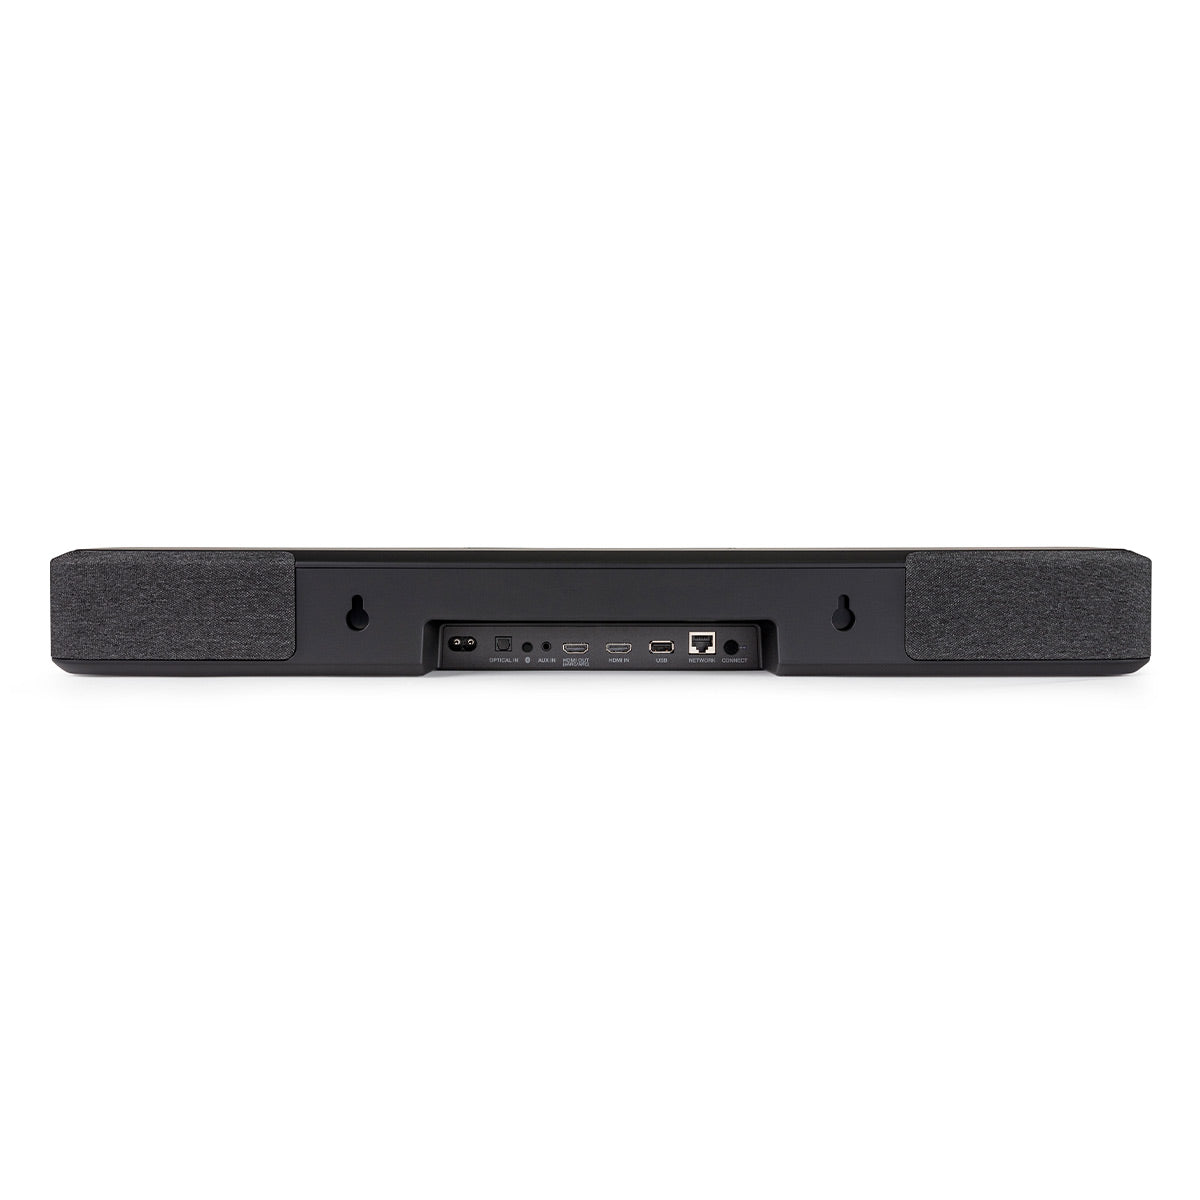 Denon Home Sound Bar 550 with Dolby Atmos and HEOS Built-in